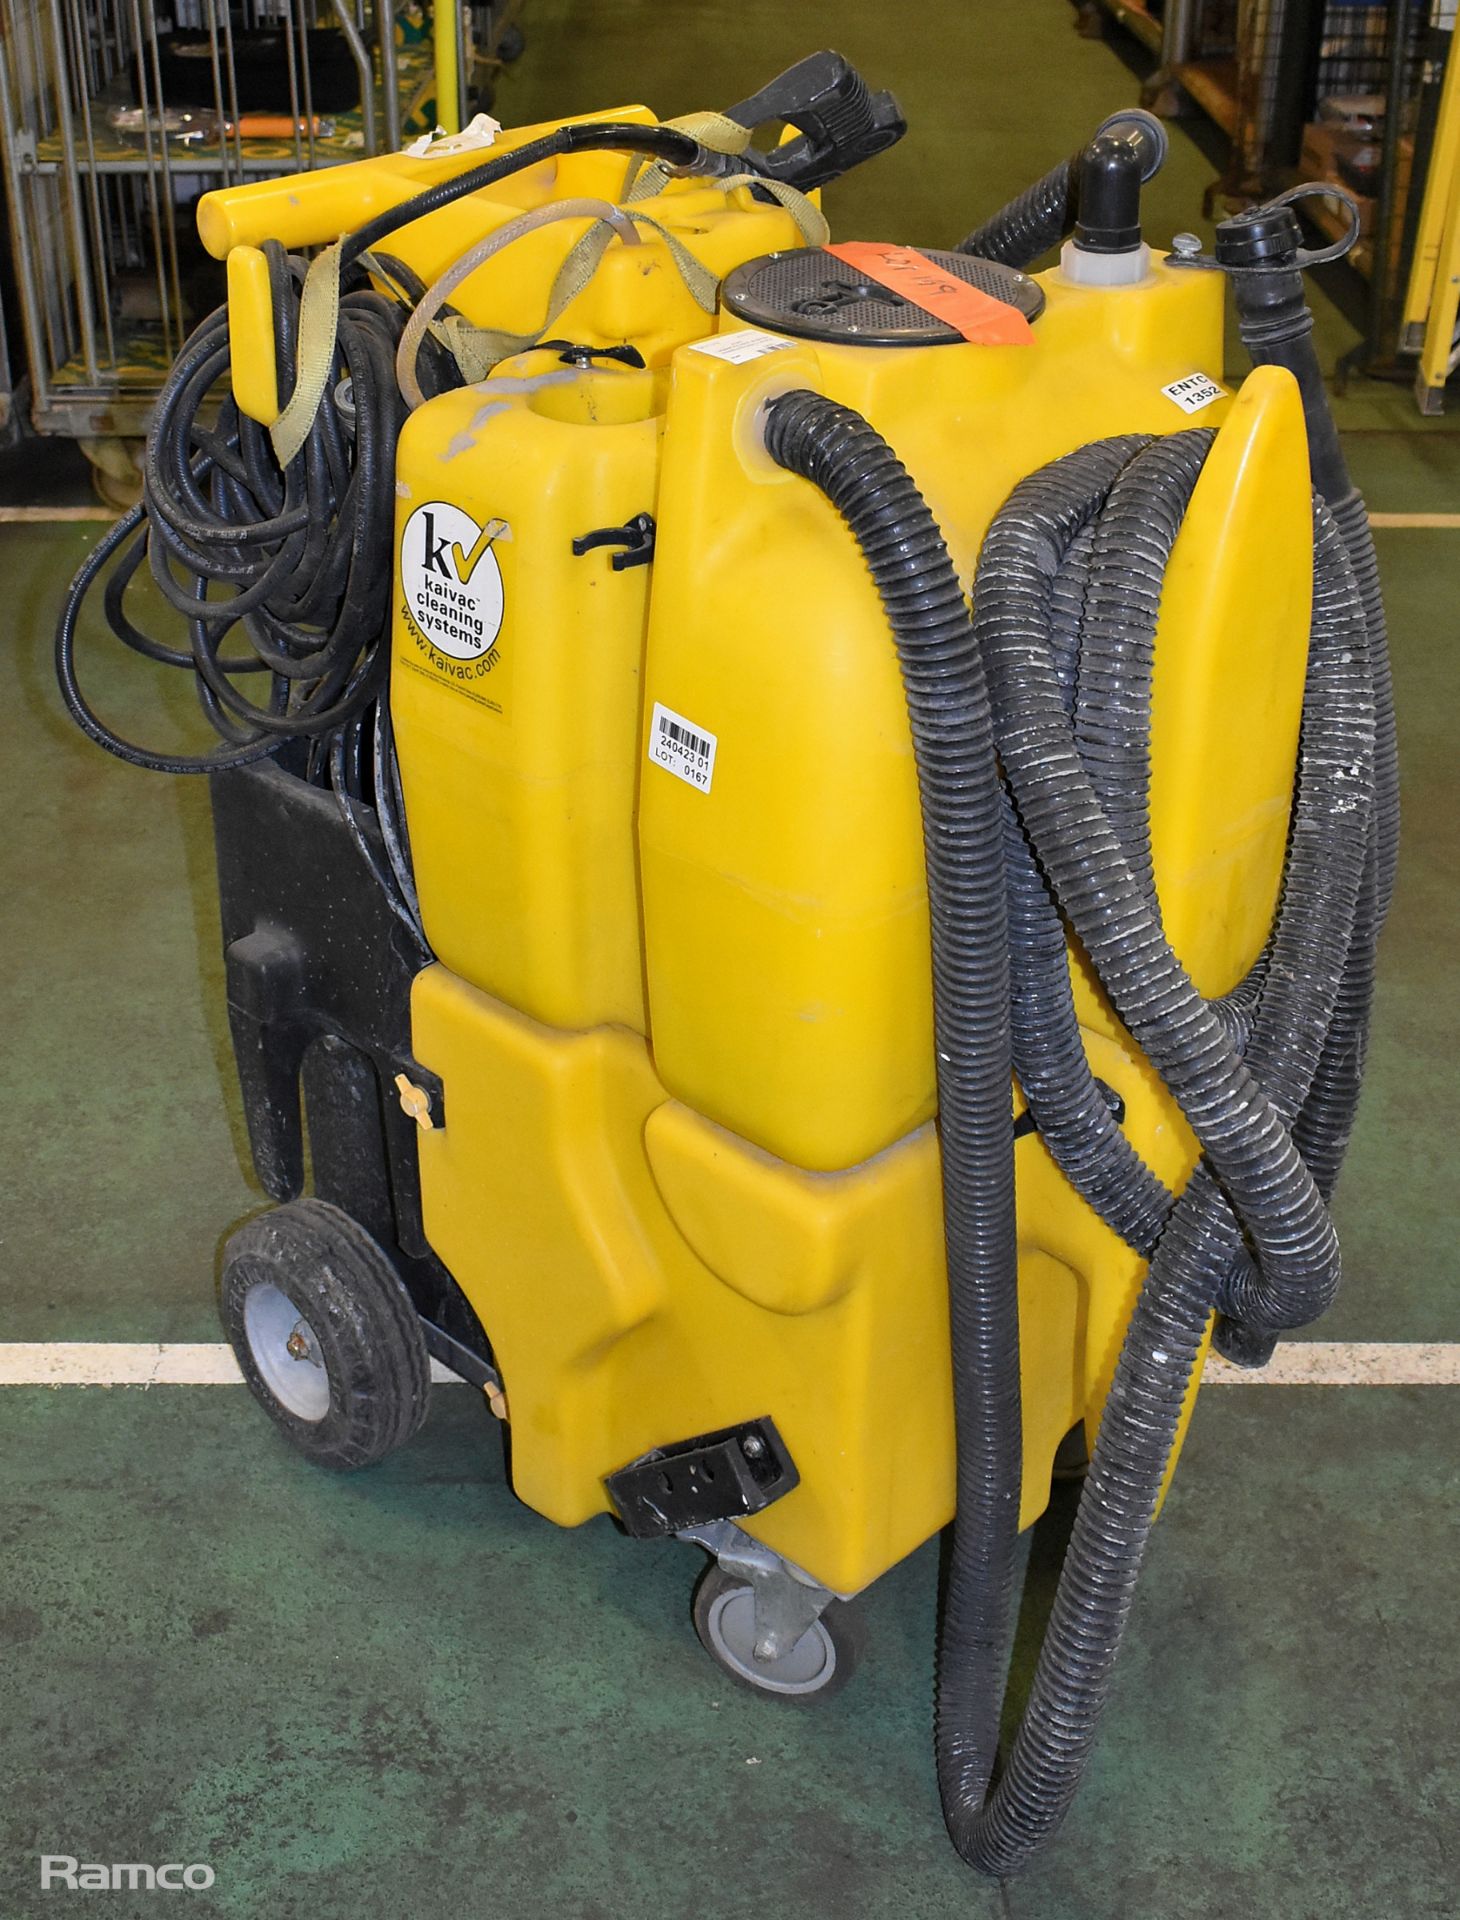 Kaivac Cleaning Systems industrial pressure washer - 240V - Image 2 of 7